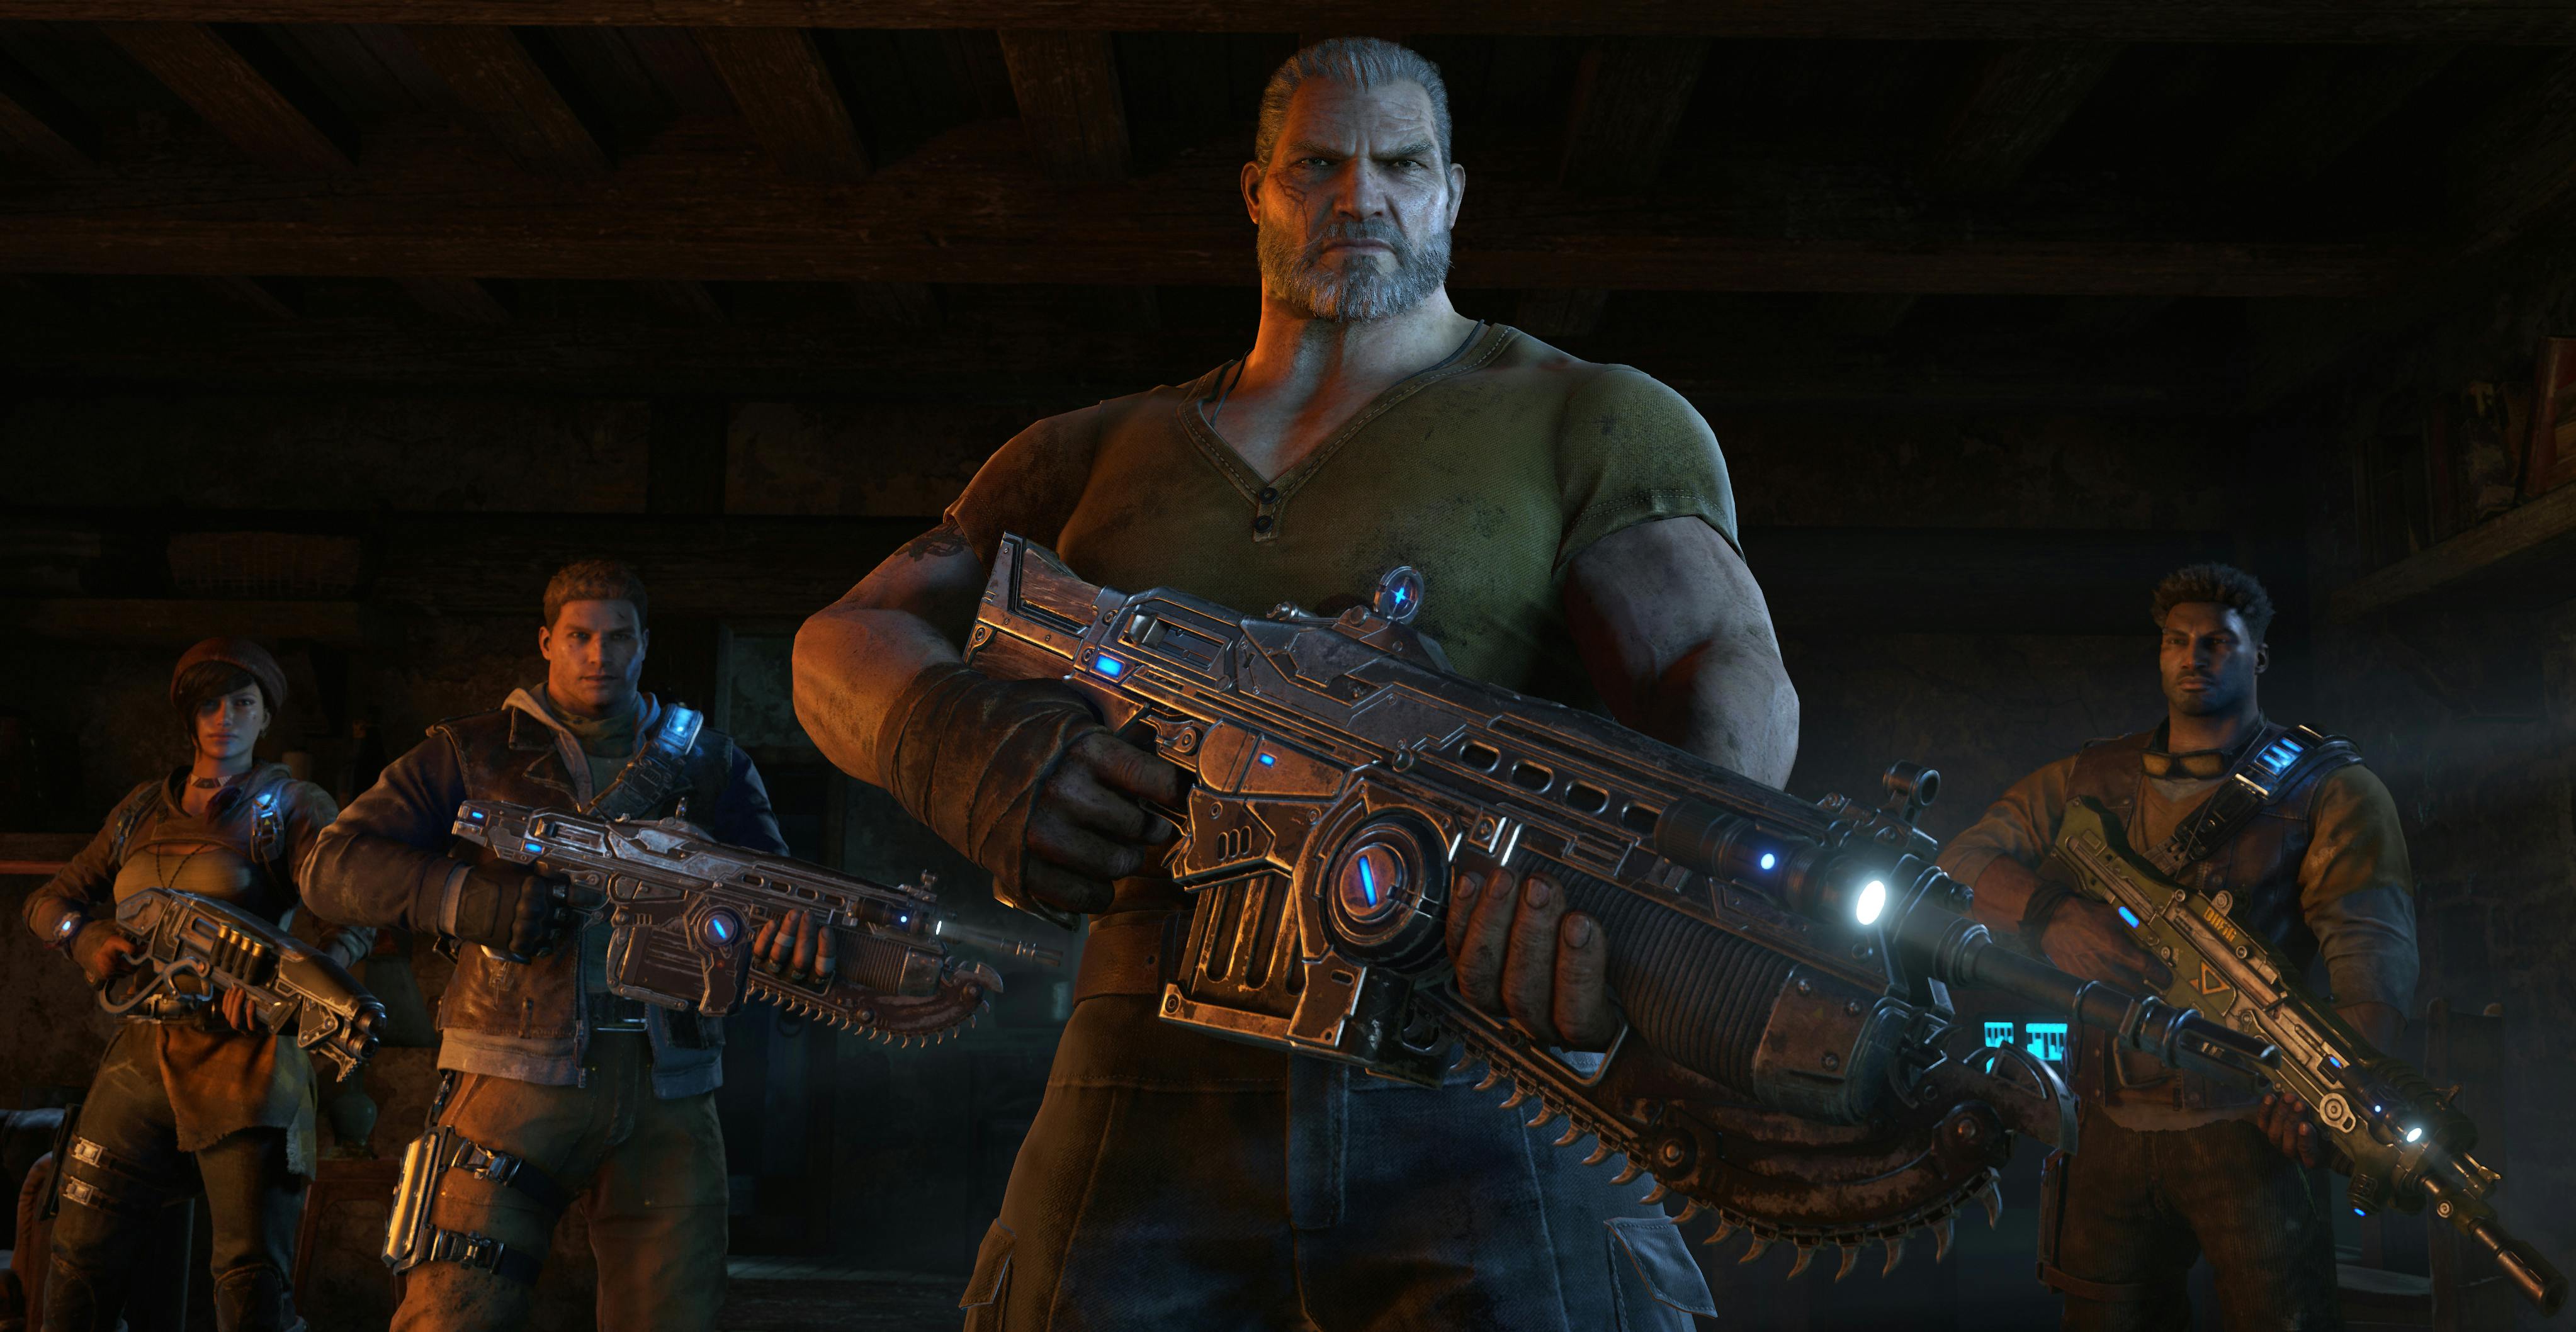 Review: Gears of War: Ultimate Edition (PC) - Hardcore Gamer